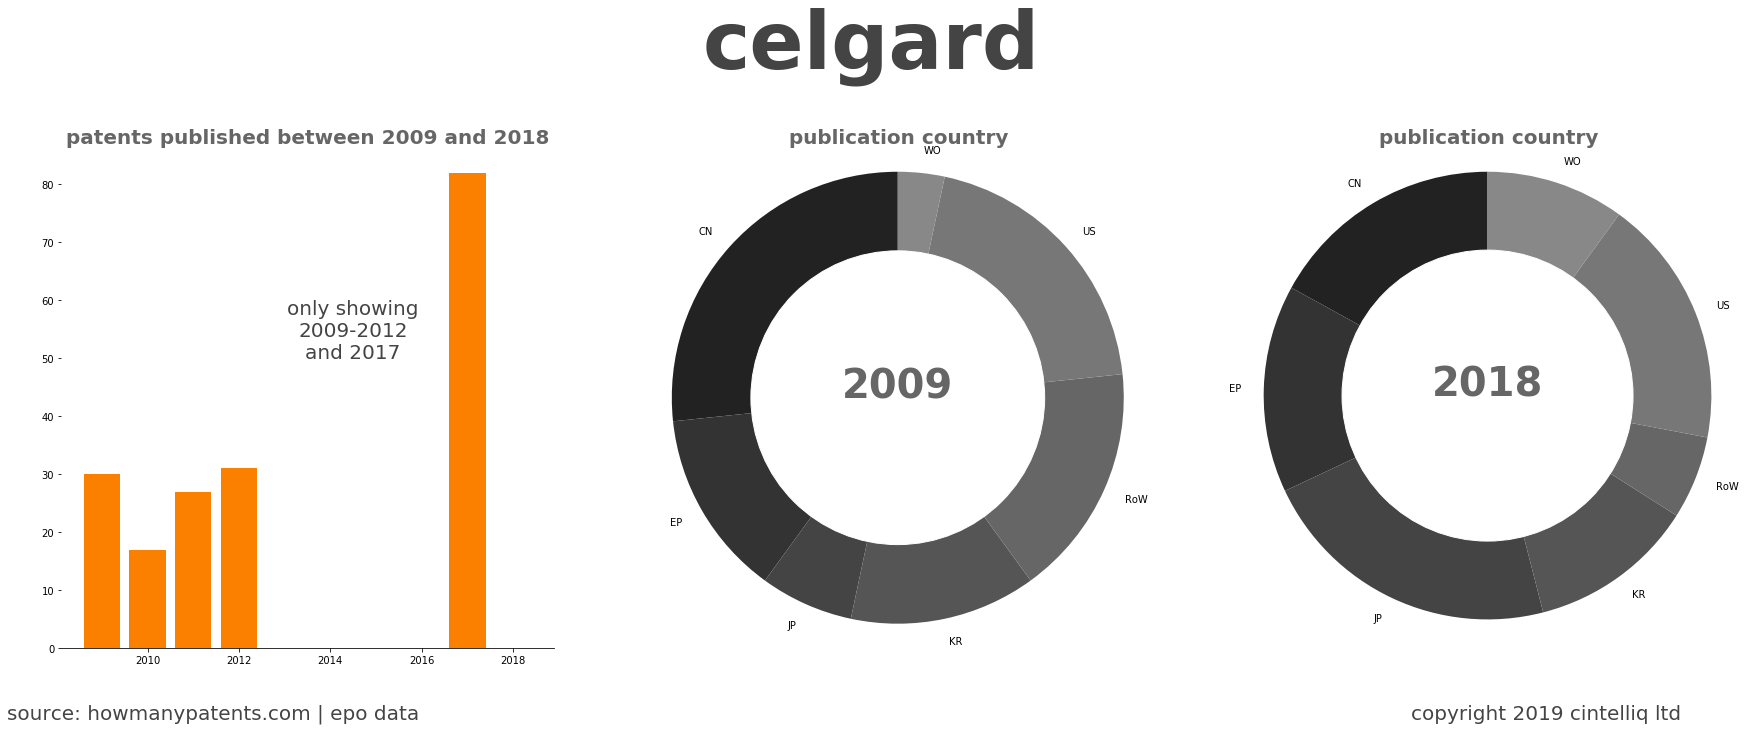 summary of patents for Celgard